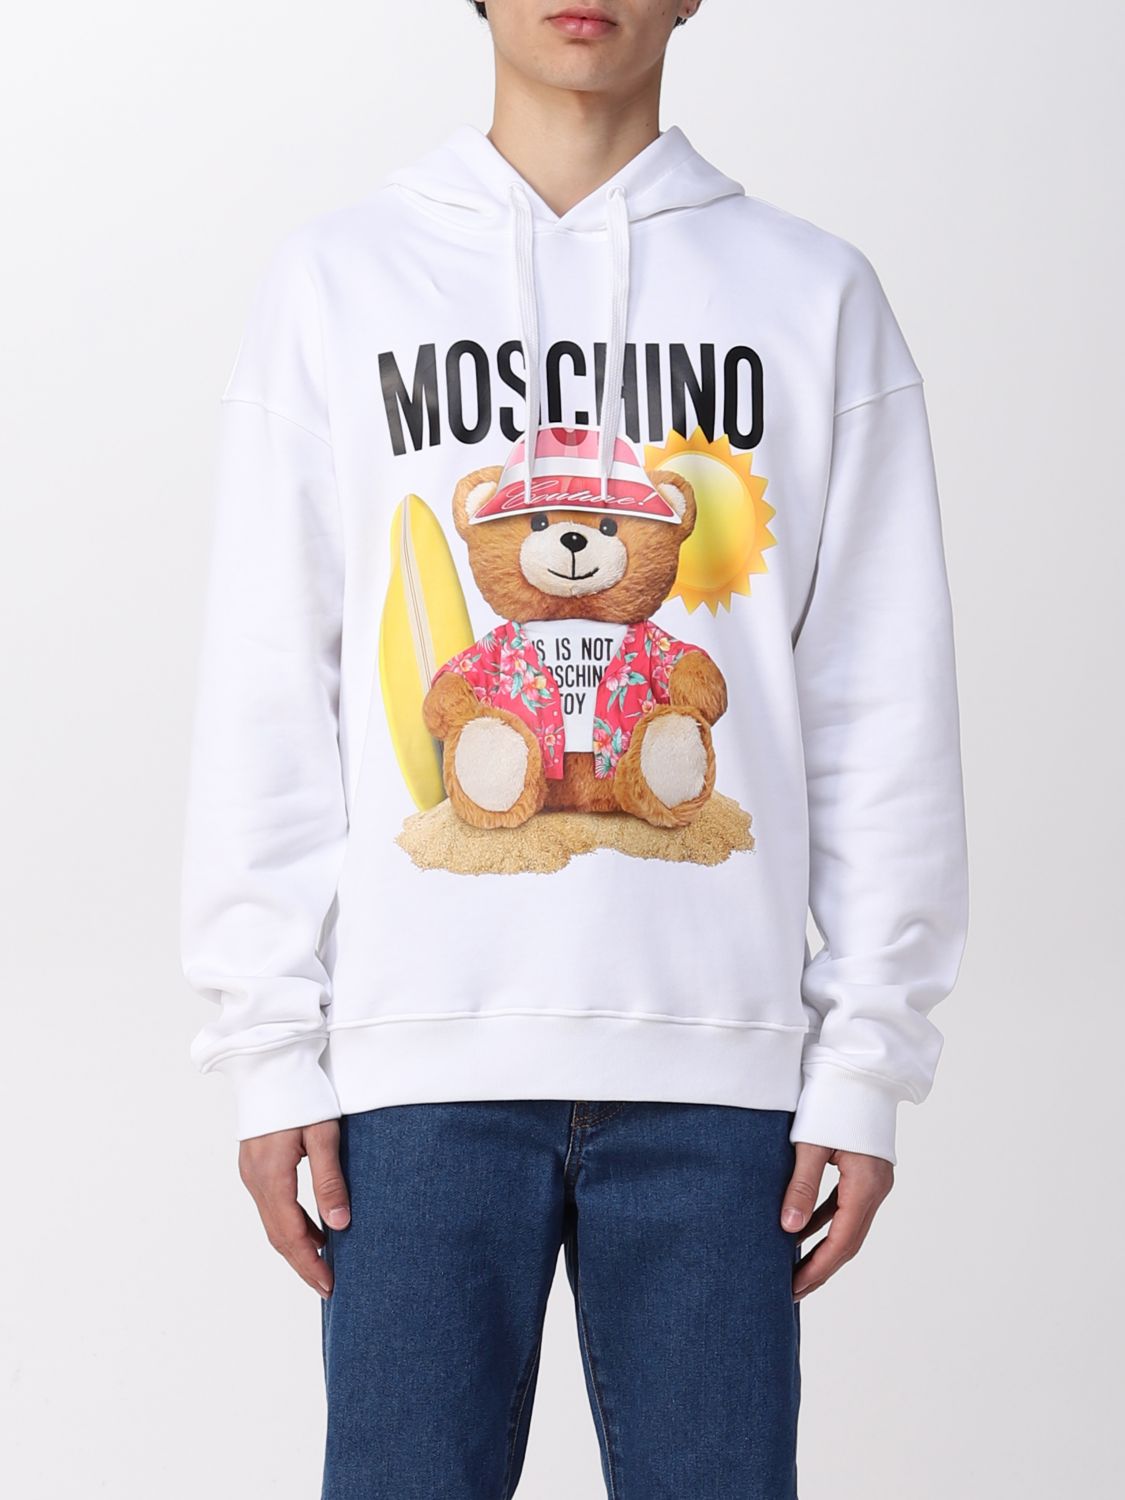 Authentic Moschino Couture Teddy Bear Hoodie Leather Biker White Size US  Medium